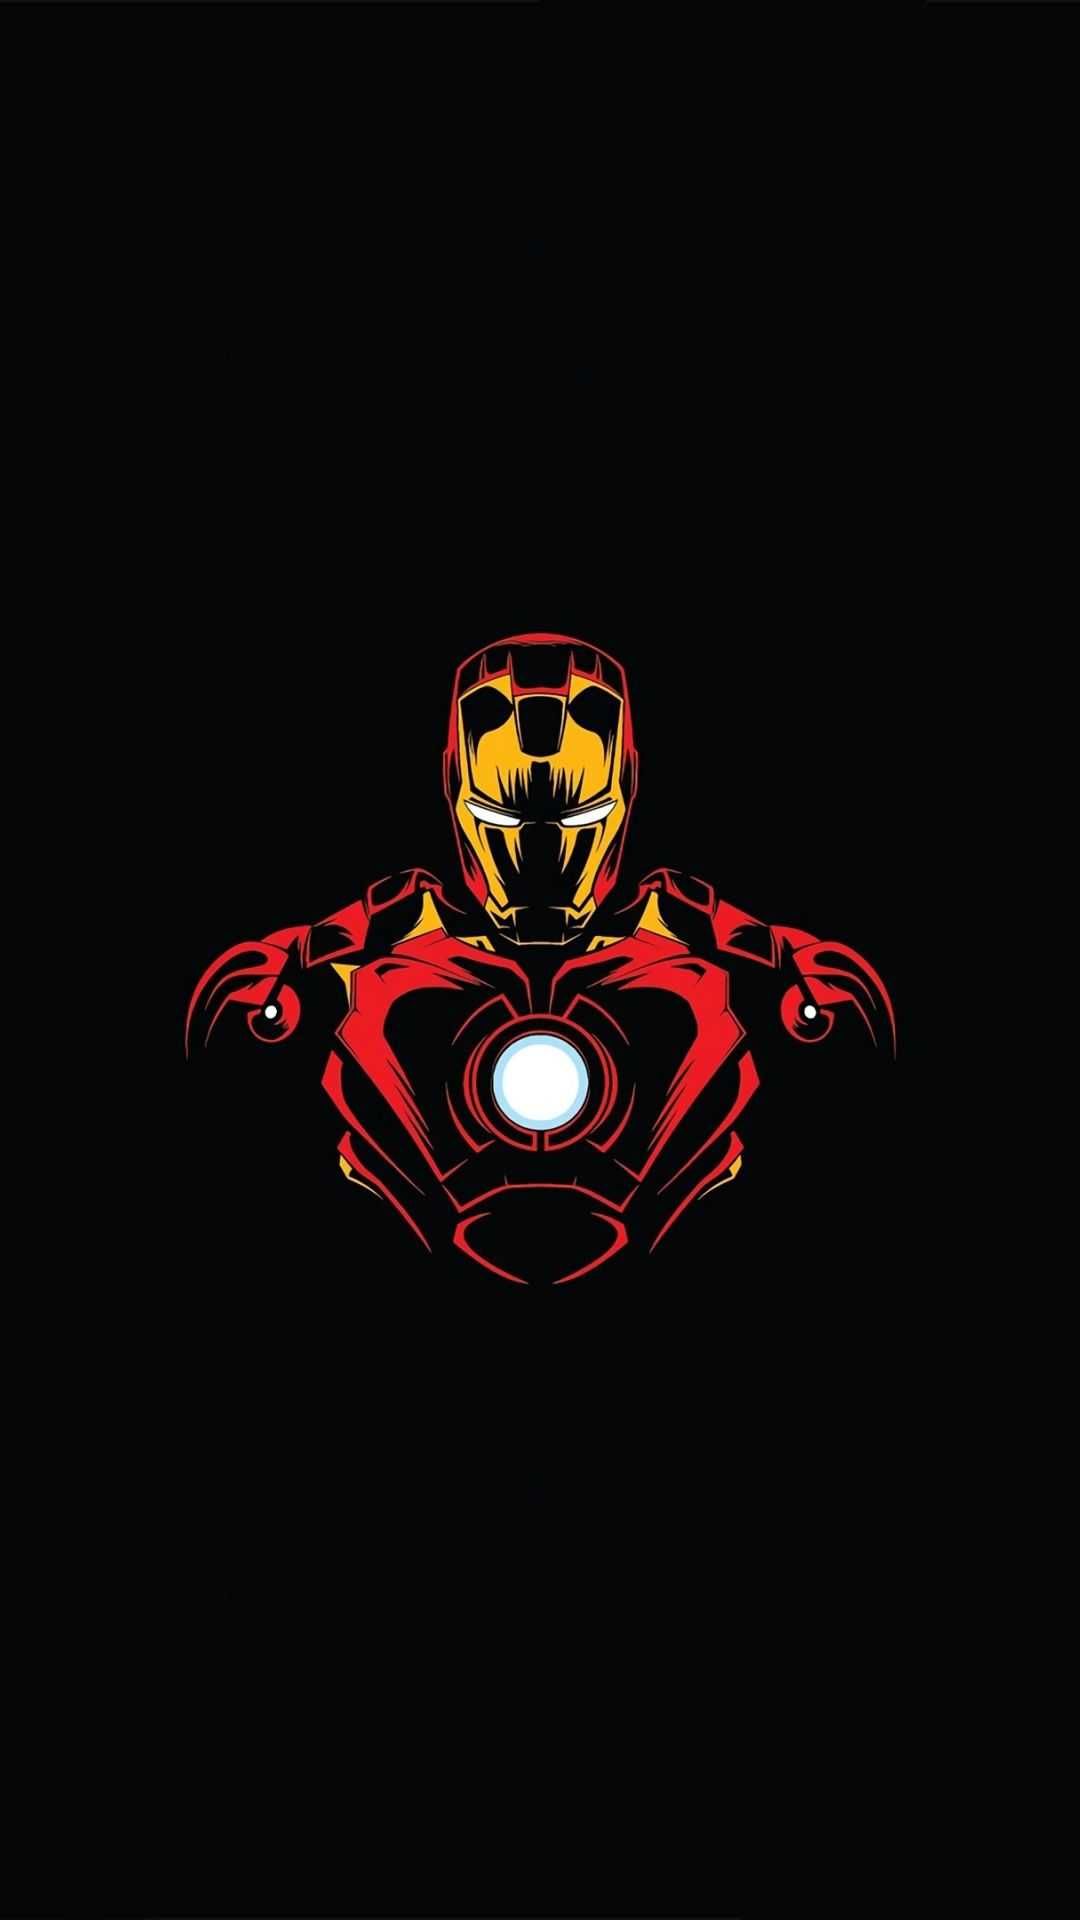 Marvel Phone Wallpaper Discover more android, Avengers, black panther, captain america, iphone wallpape. Marvel phone wallpaper, Marvel wallpaper hd, Iron man art